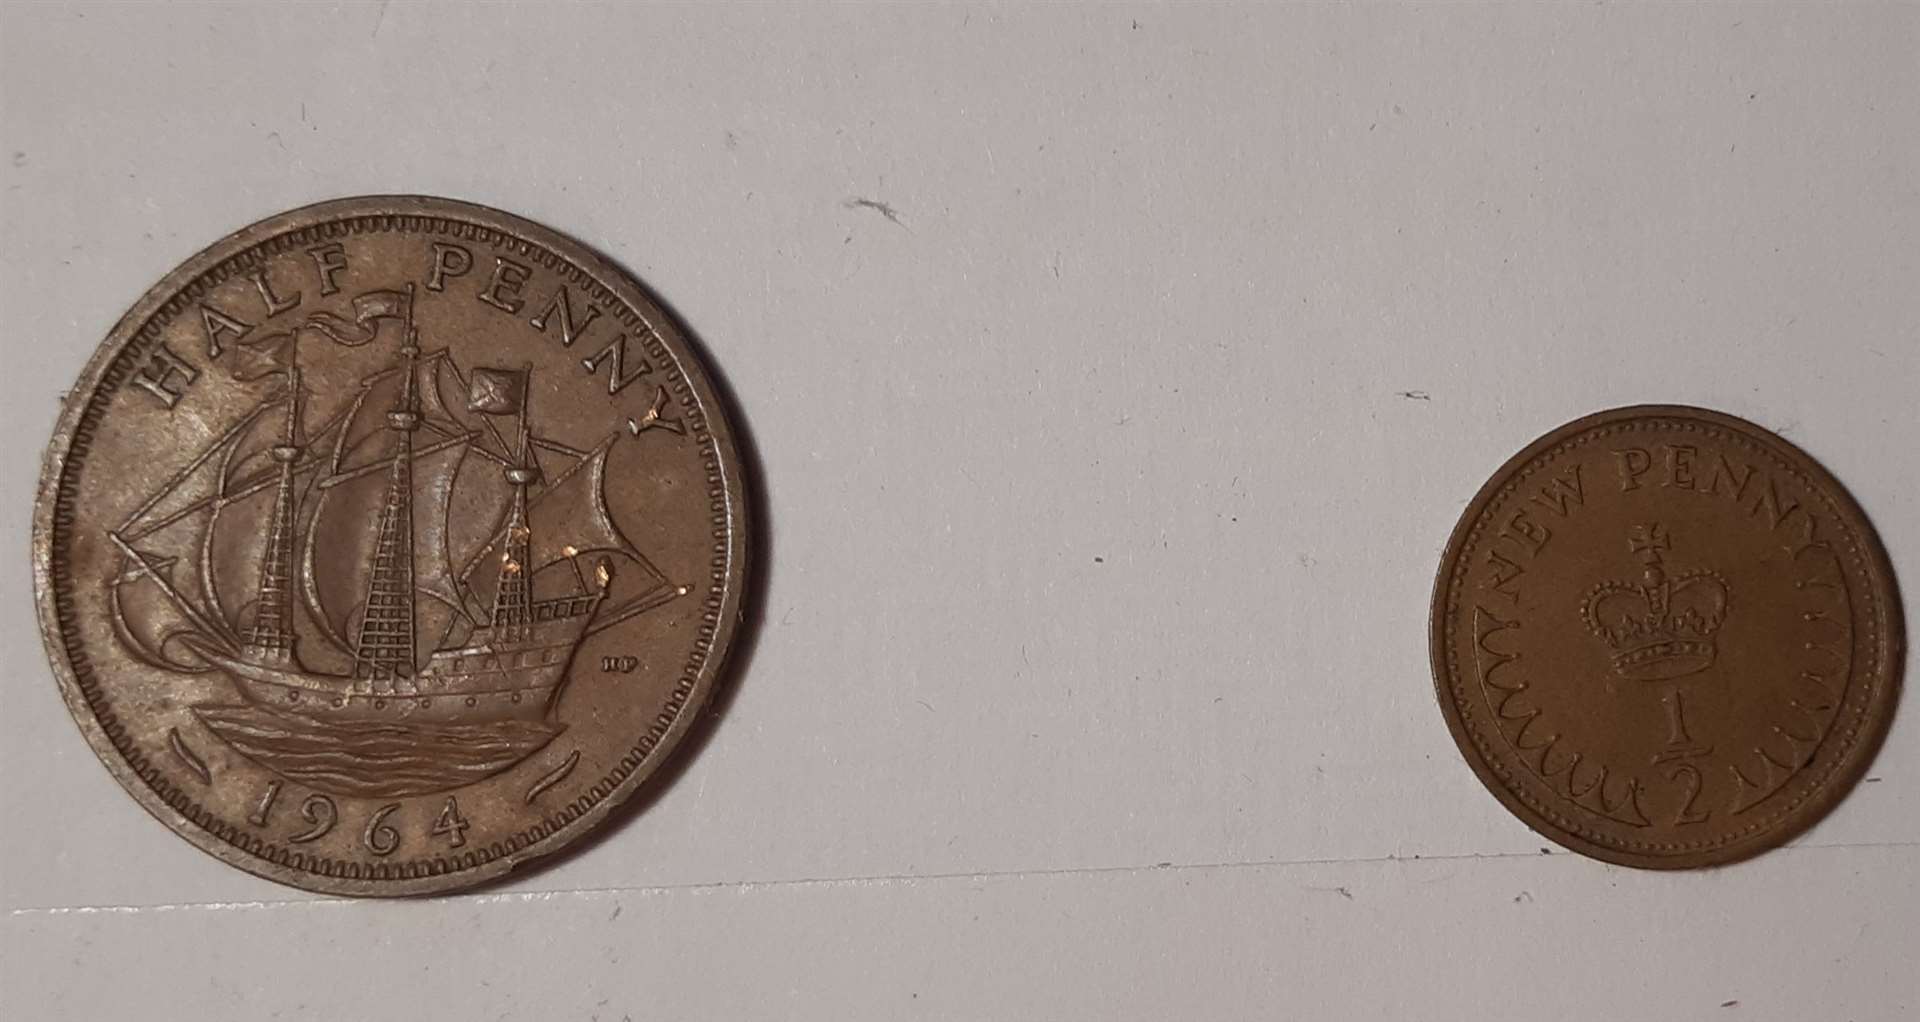 The old and new ha'pennies